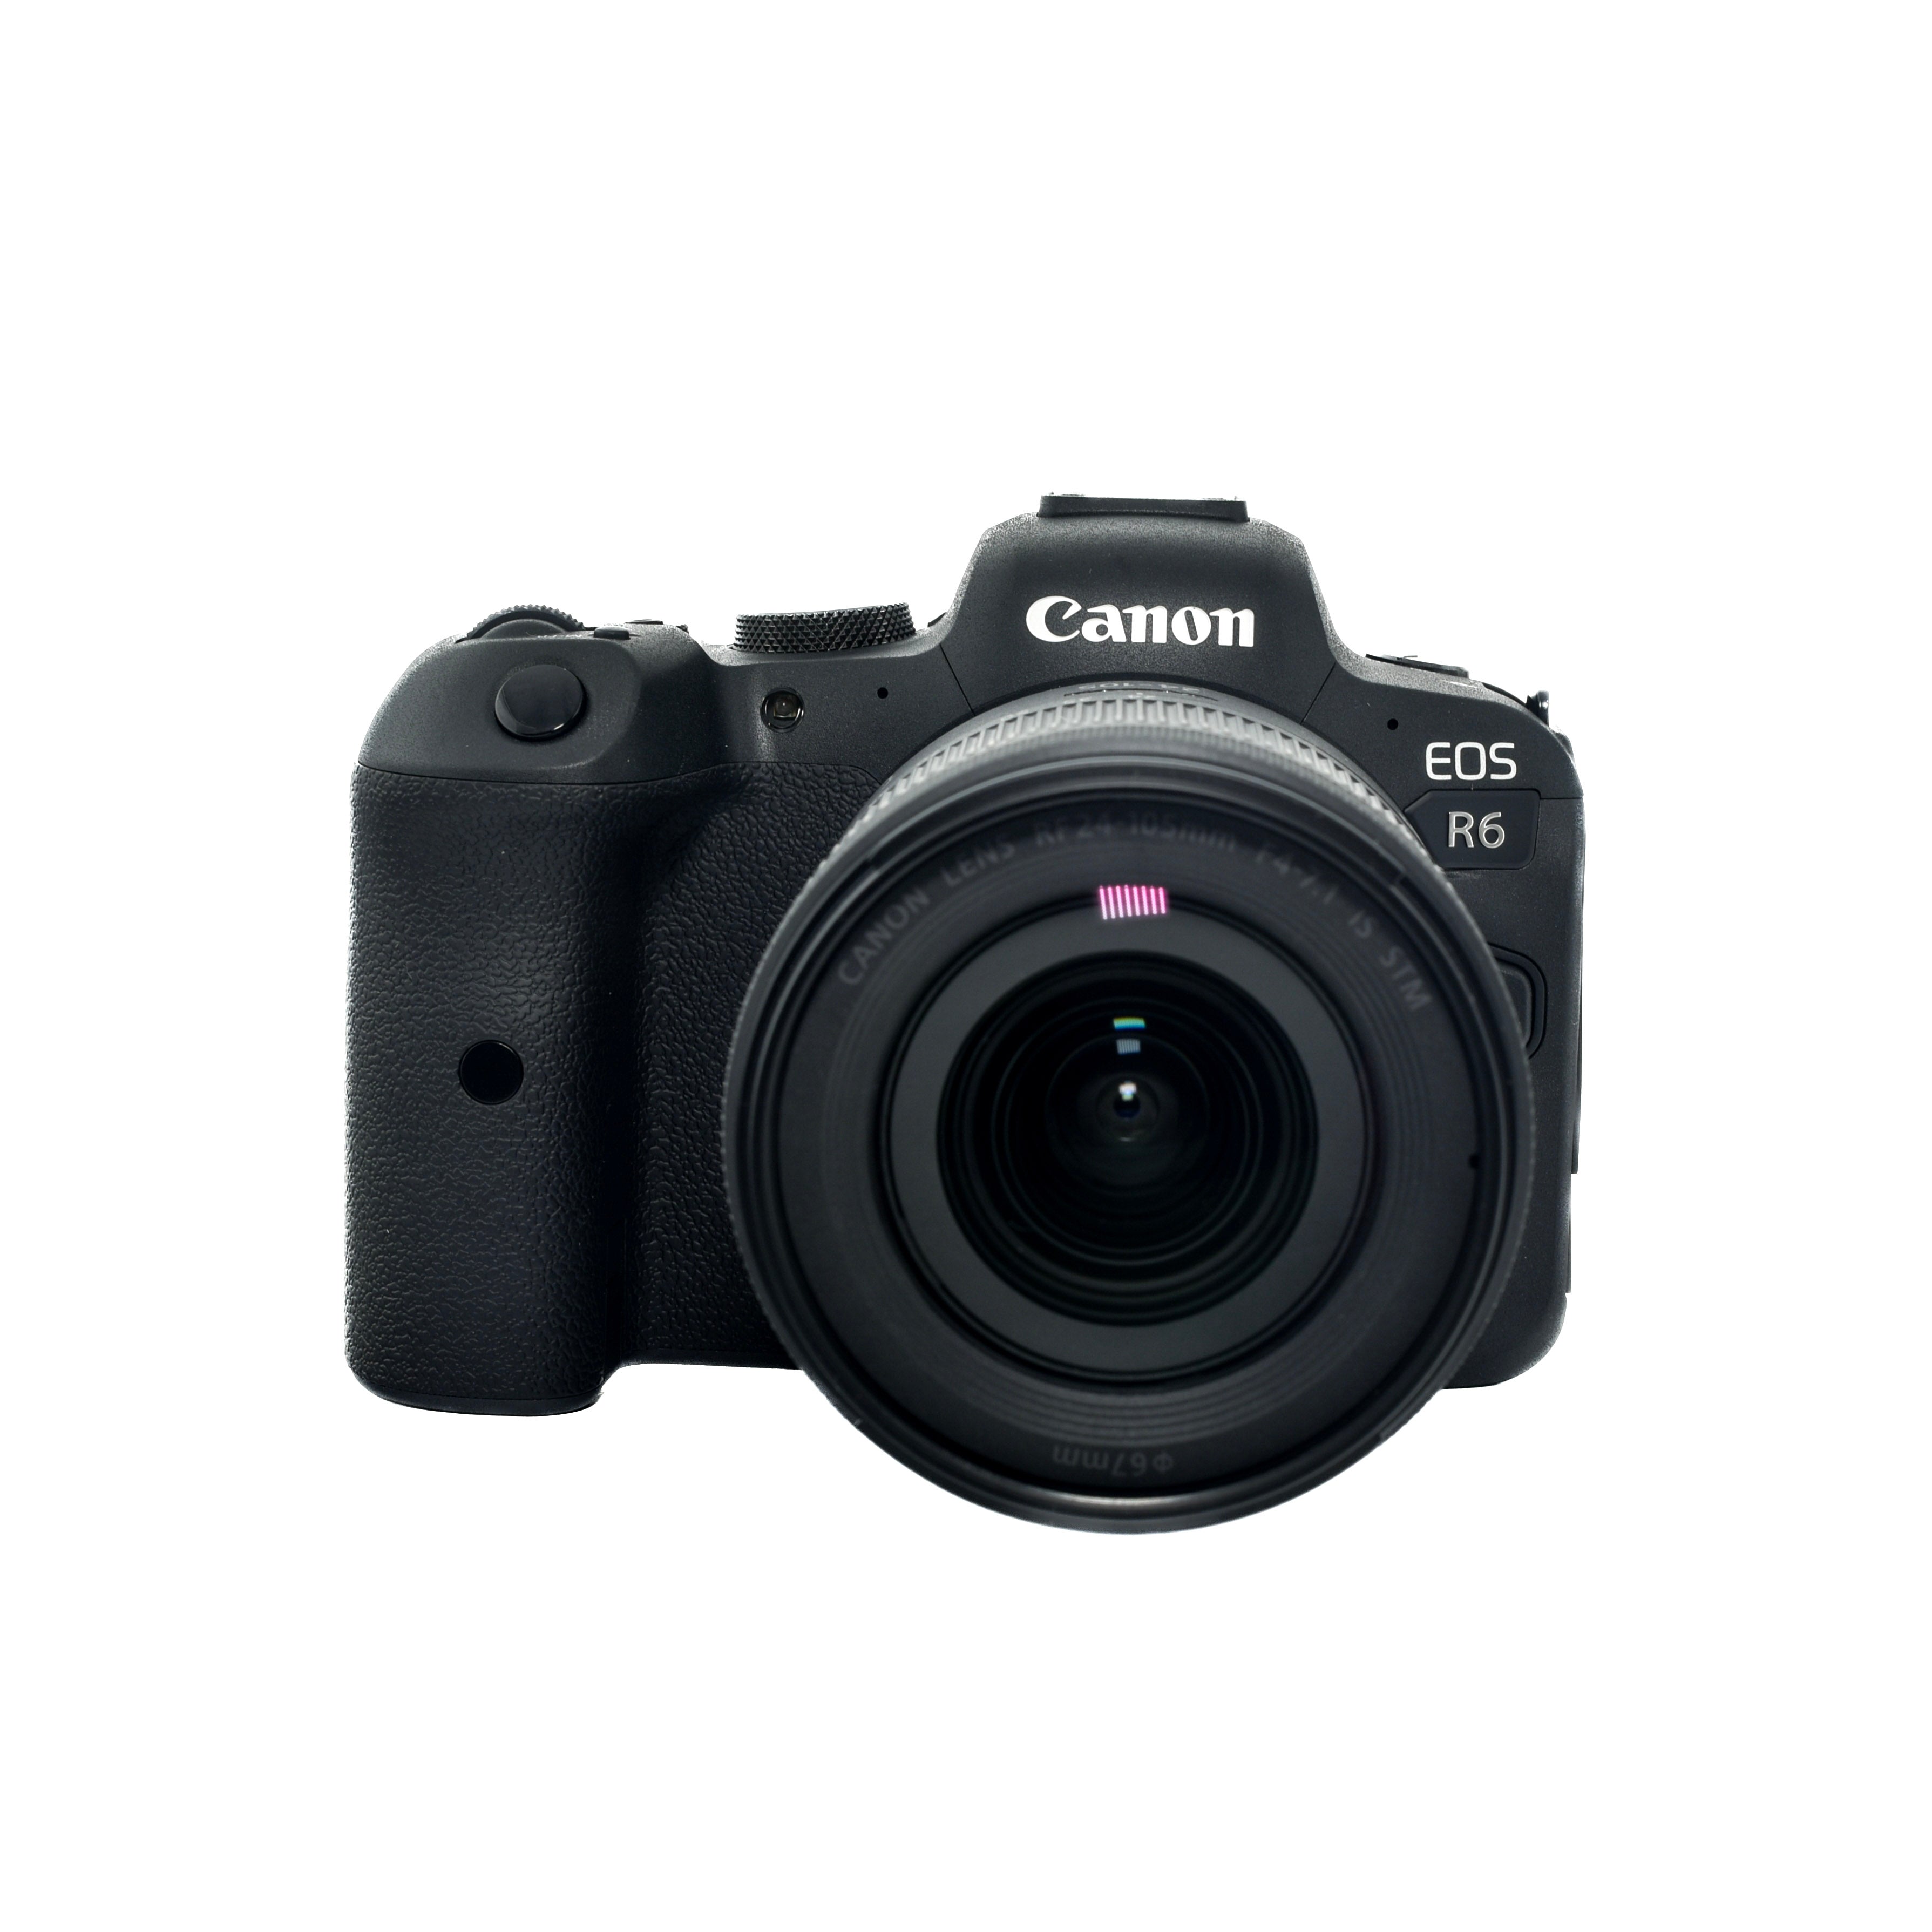 Canon Eos R6  Mirrorless Dslr Camera & 24-105mm IS STM lens